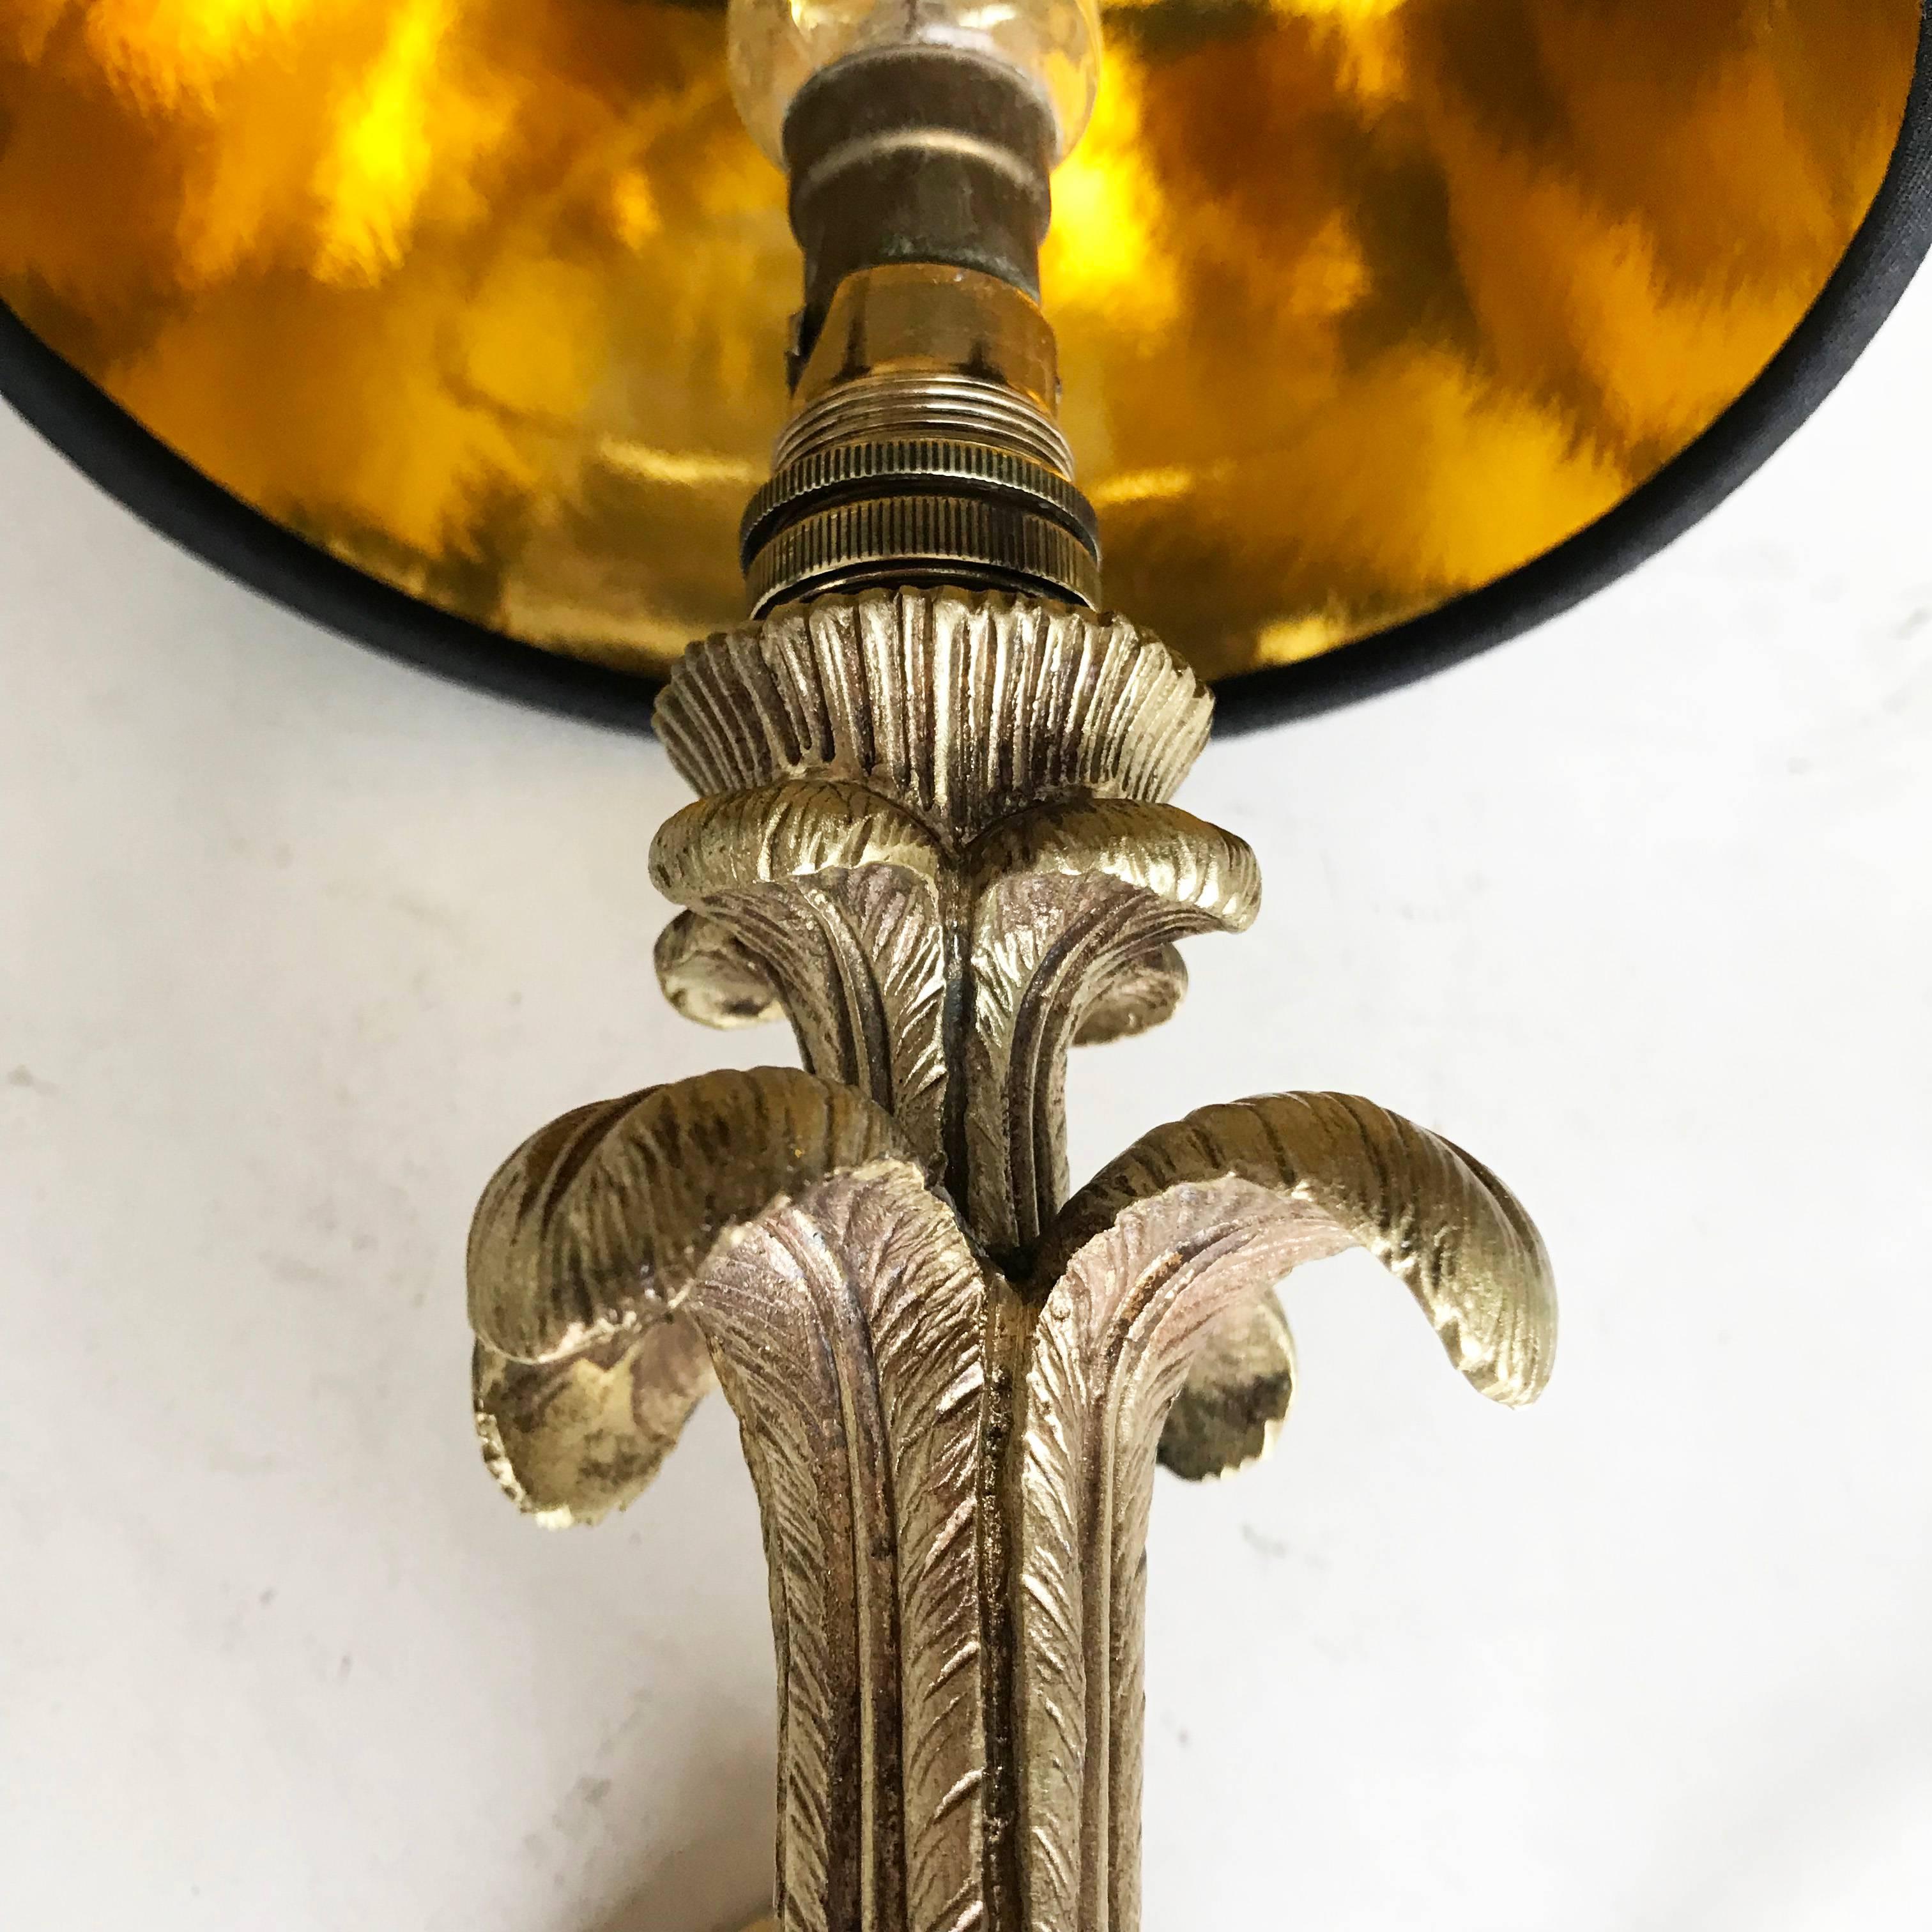 Superb pair of Maison Baguès horse sconces
US rewired and in working condition
One bulb 25 watt max

Measures: back plate 3 inches W, 4.2 inches H.